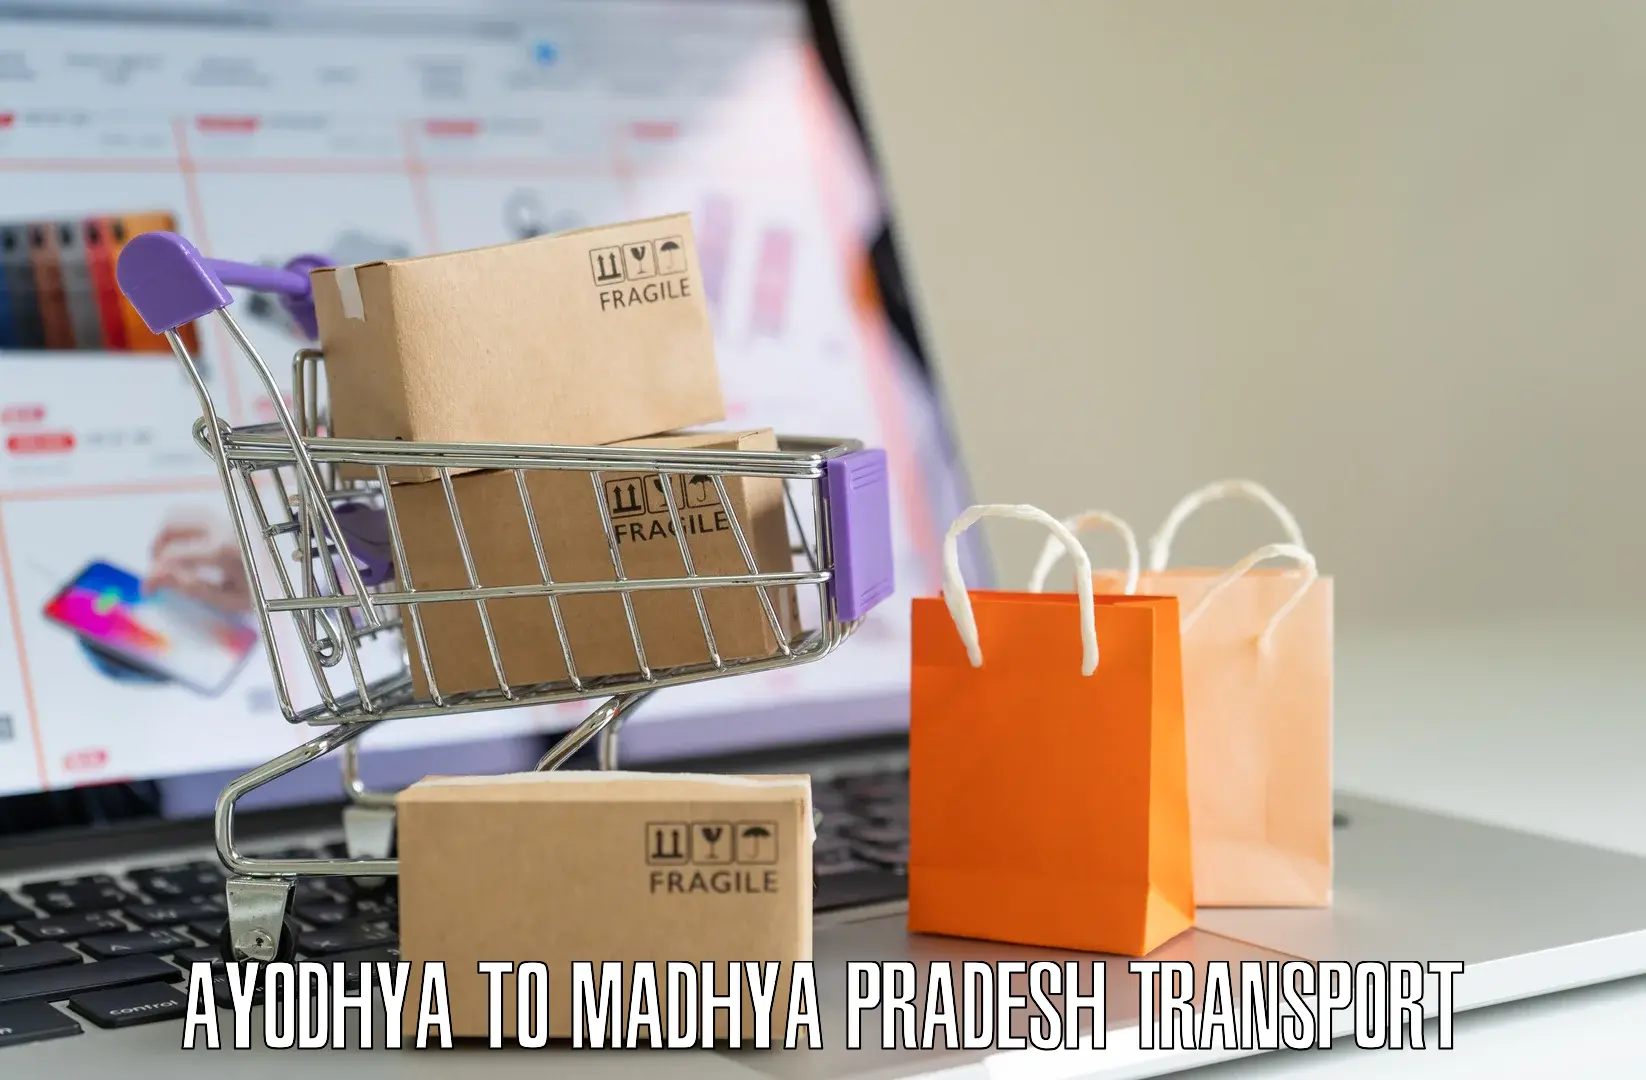 Interstate transport services Ayodhya to Bhopal